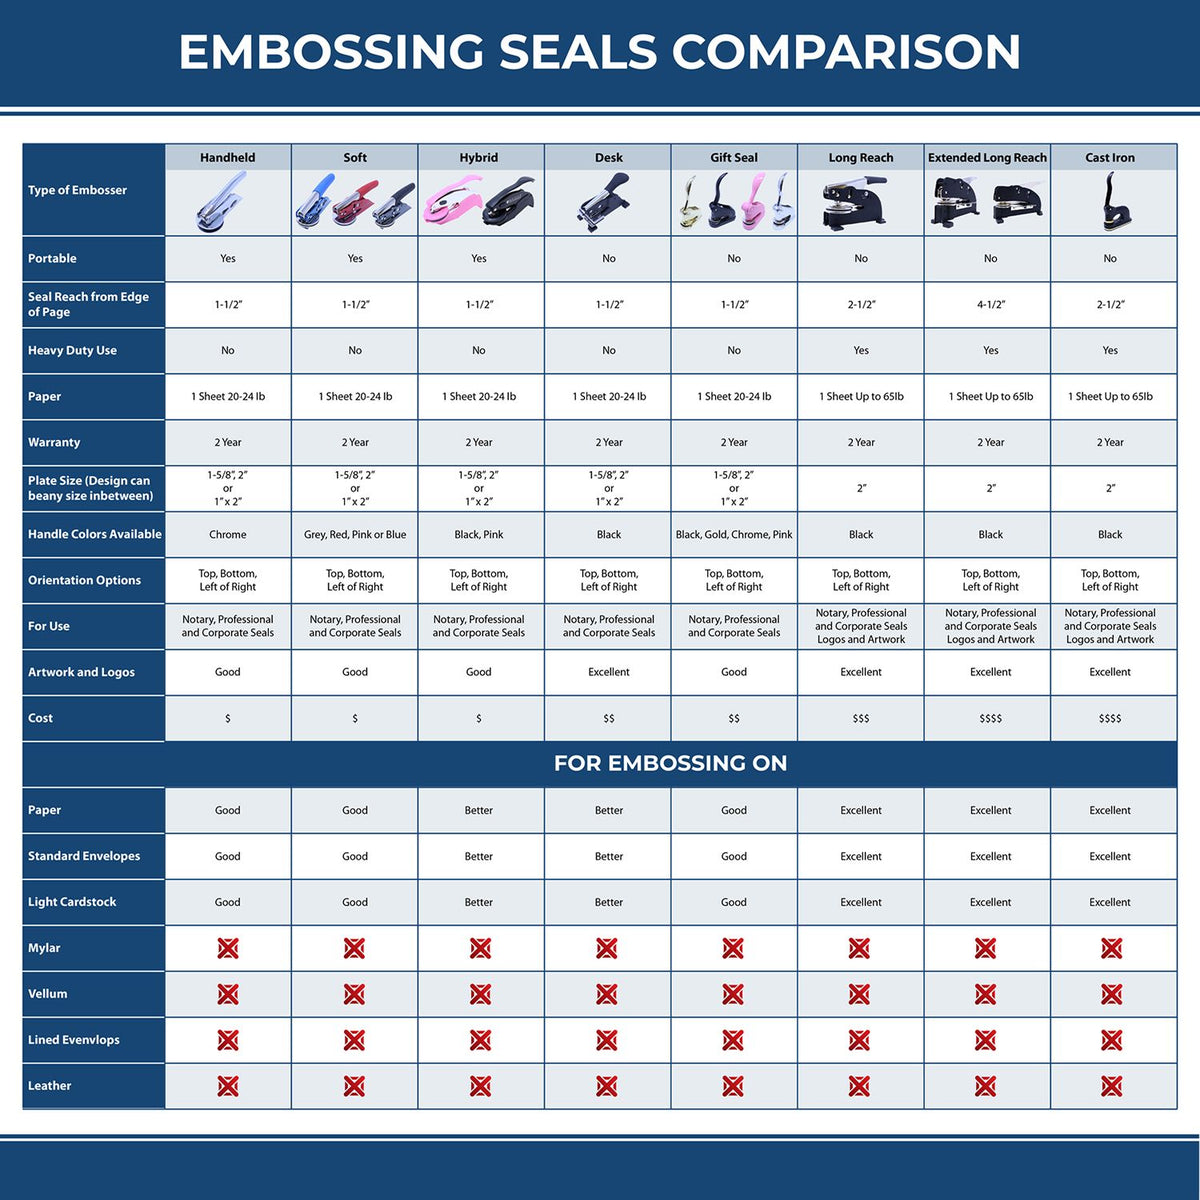 A comparison chart for the different types of mount models available for the State of Florida Long Reach Architectural Embossing Seal.